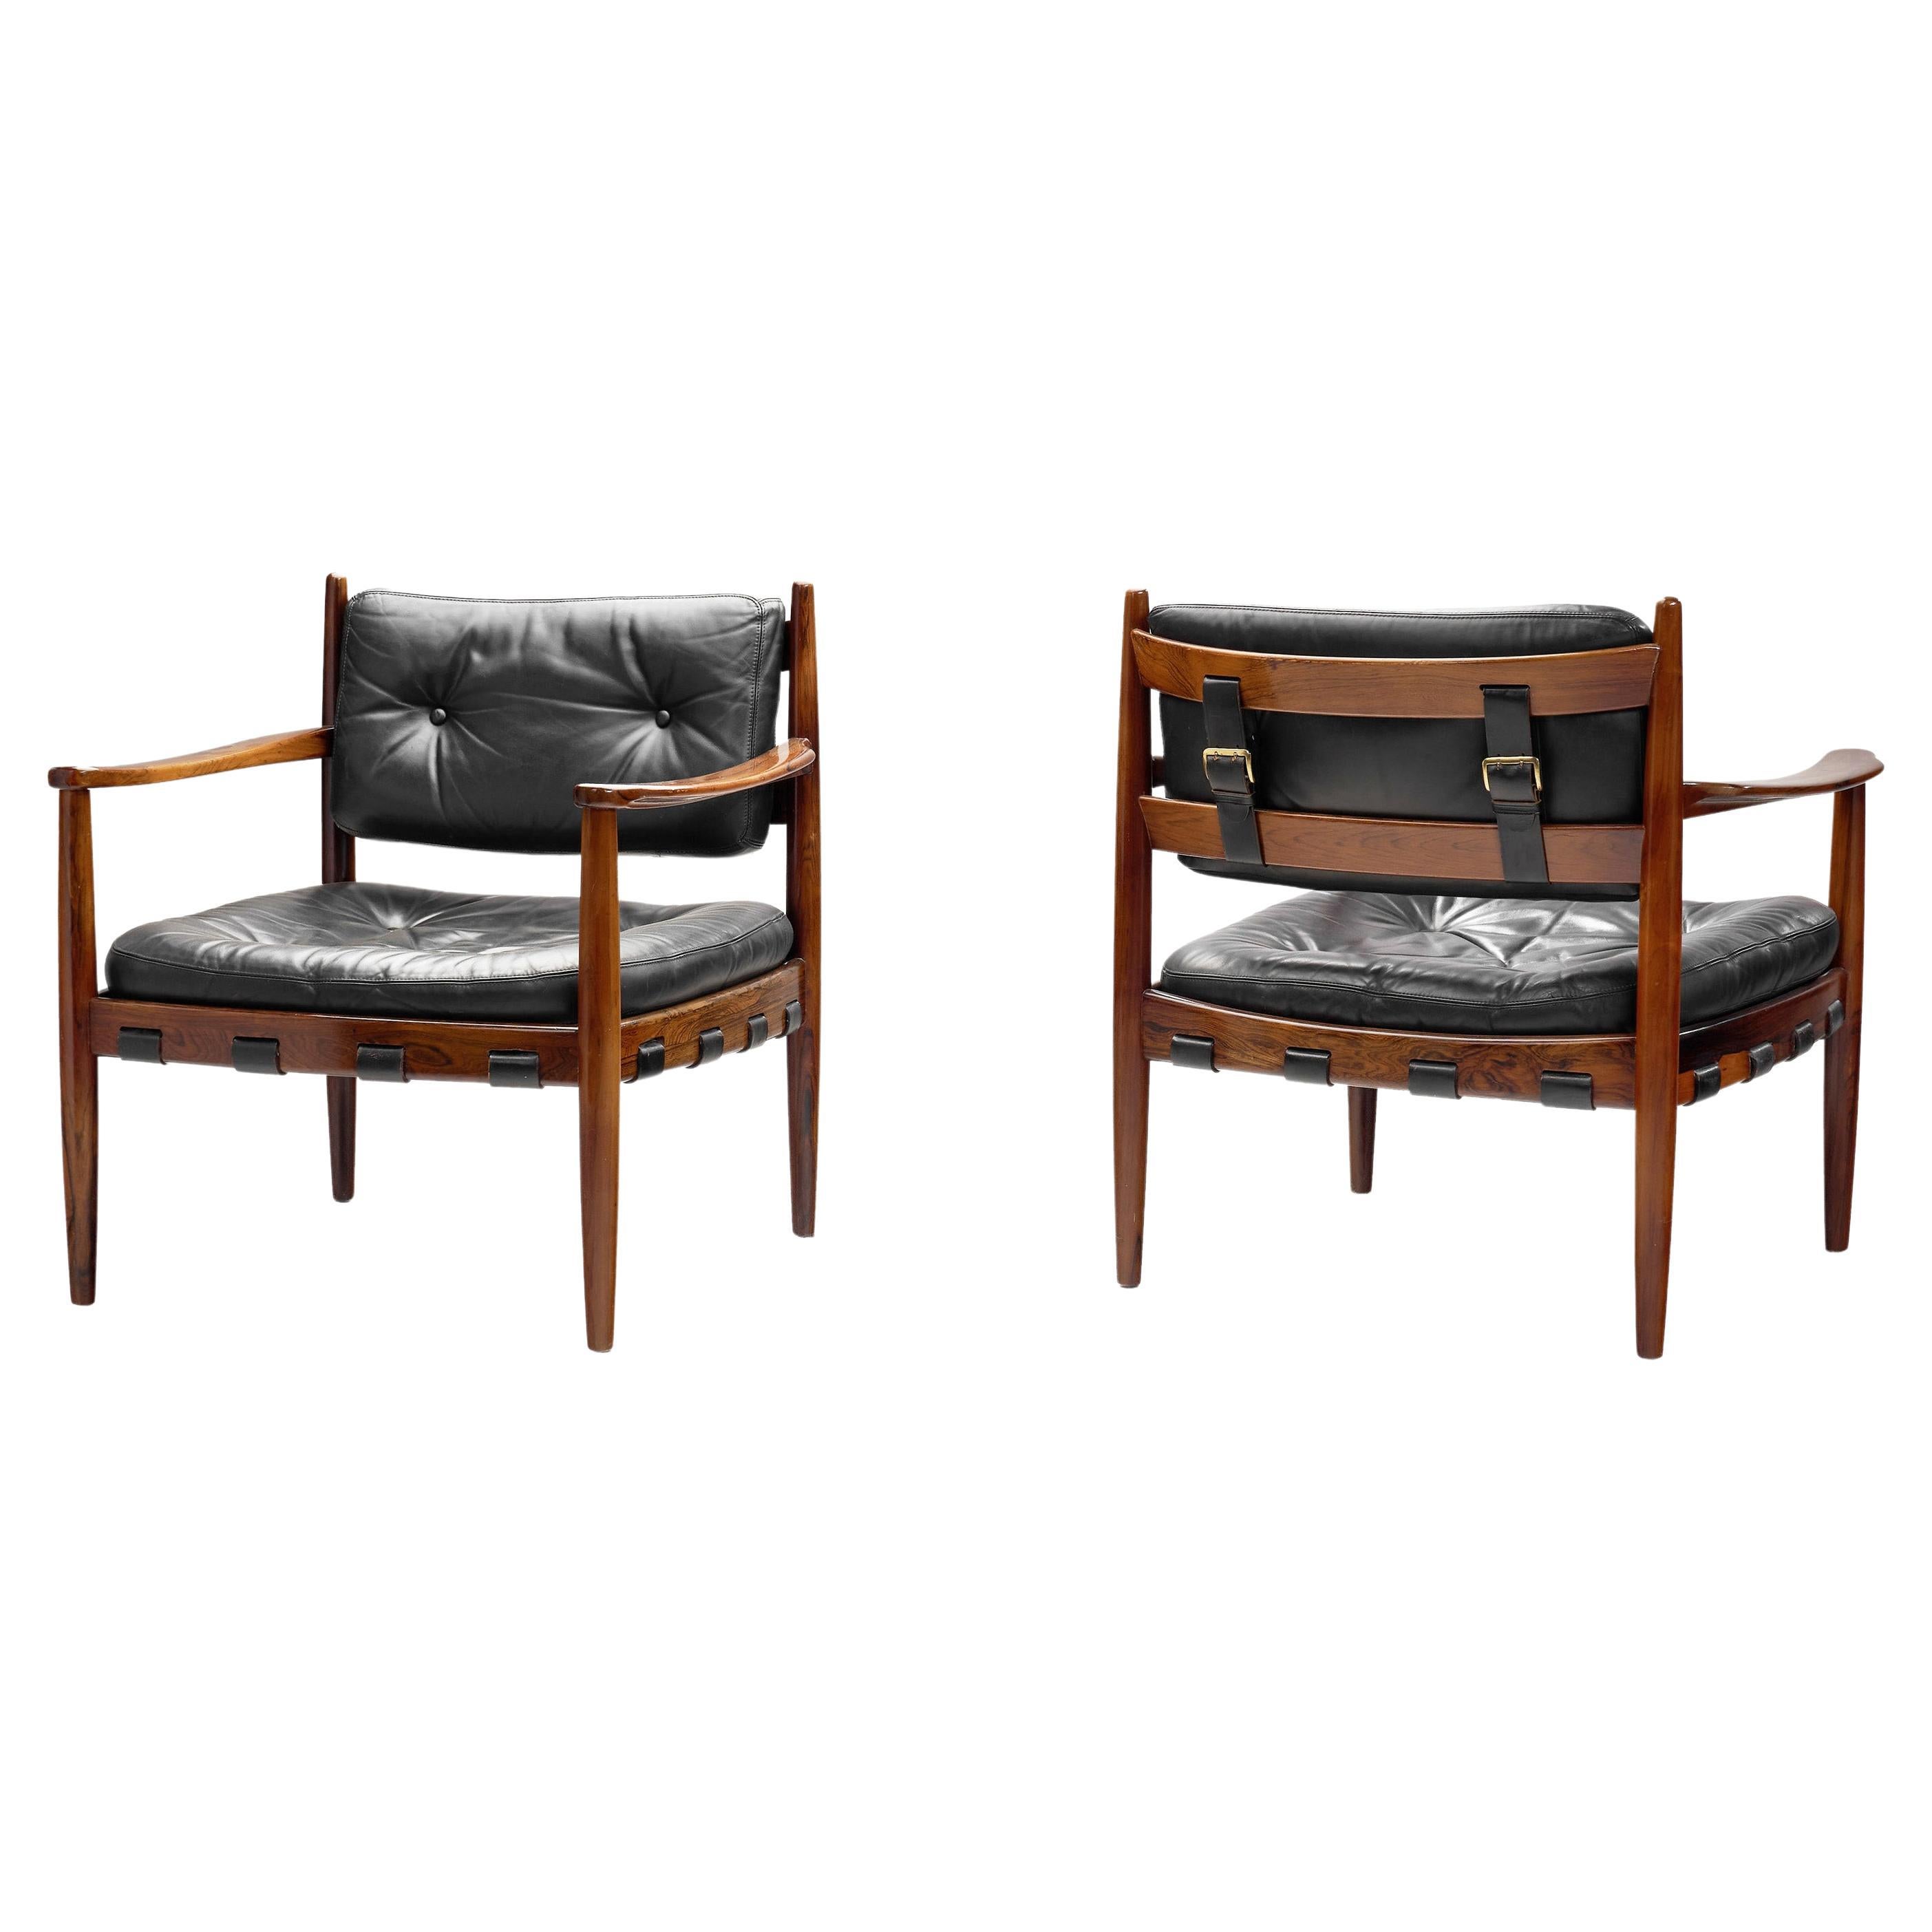 Set of Leather and Wood 'Cadett' Easy Chairs by Eric Merthen, Sweden 1960s For Sale